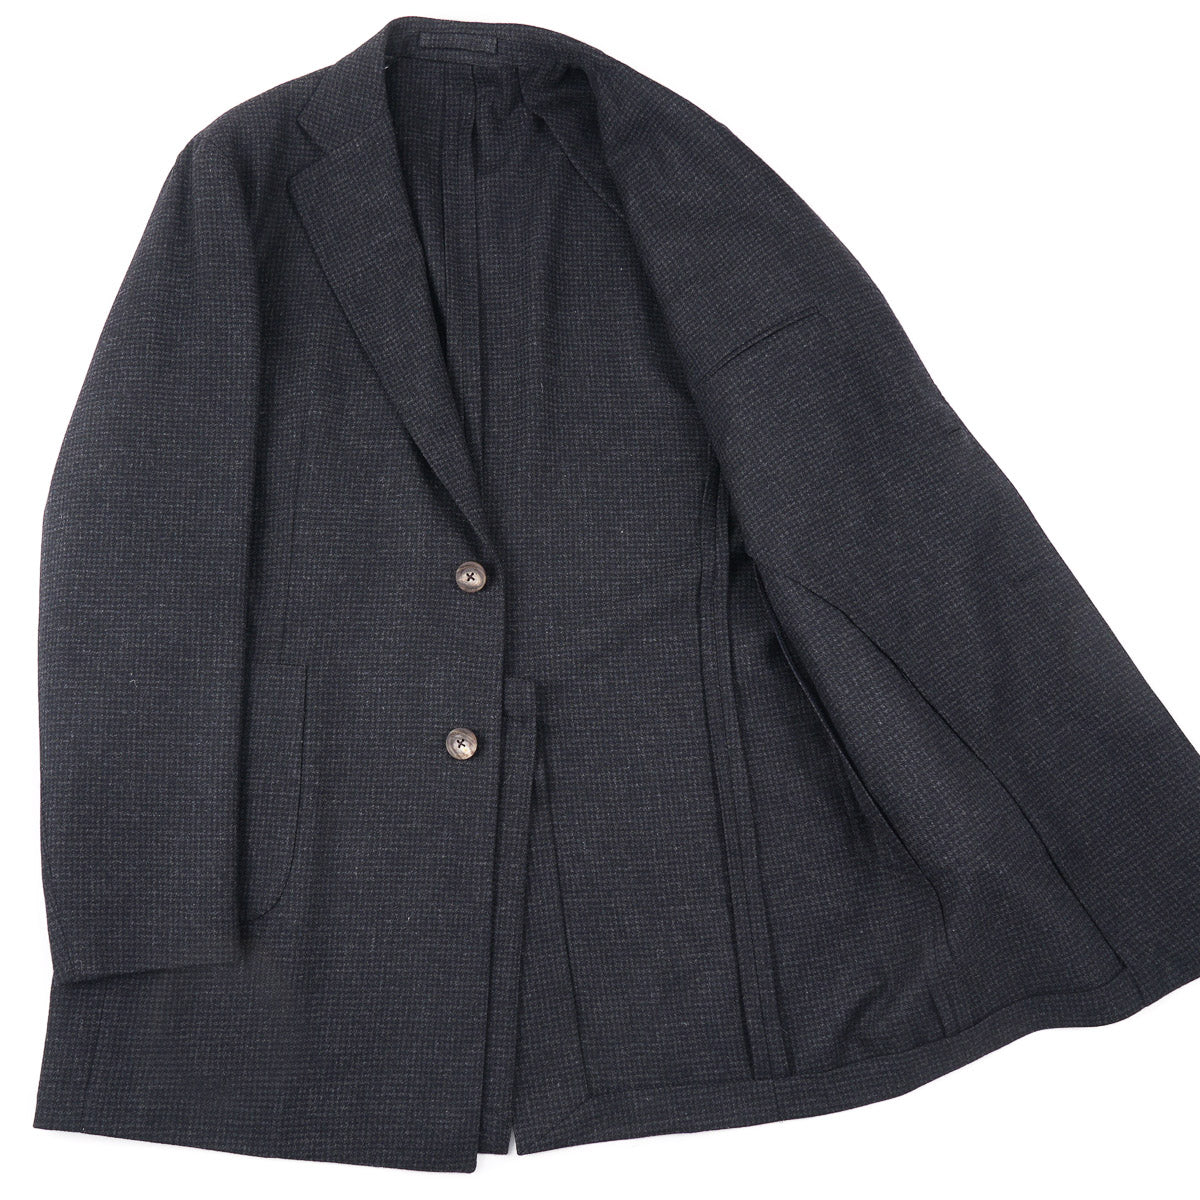 Finamore Soft-Constructed Wool Overcoat - Top Shelf Apparel